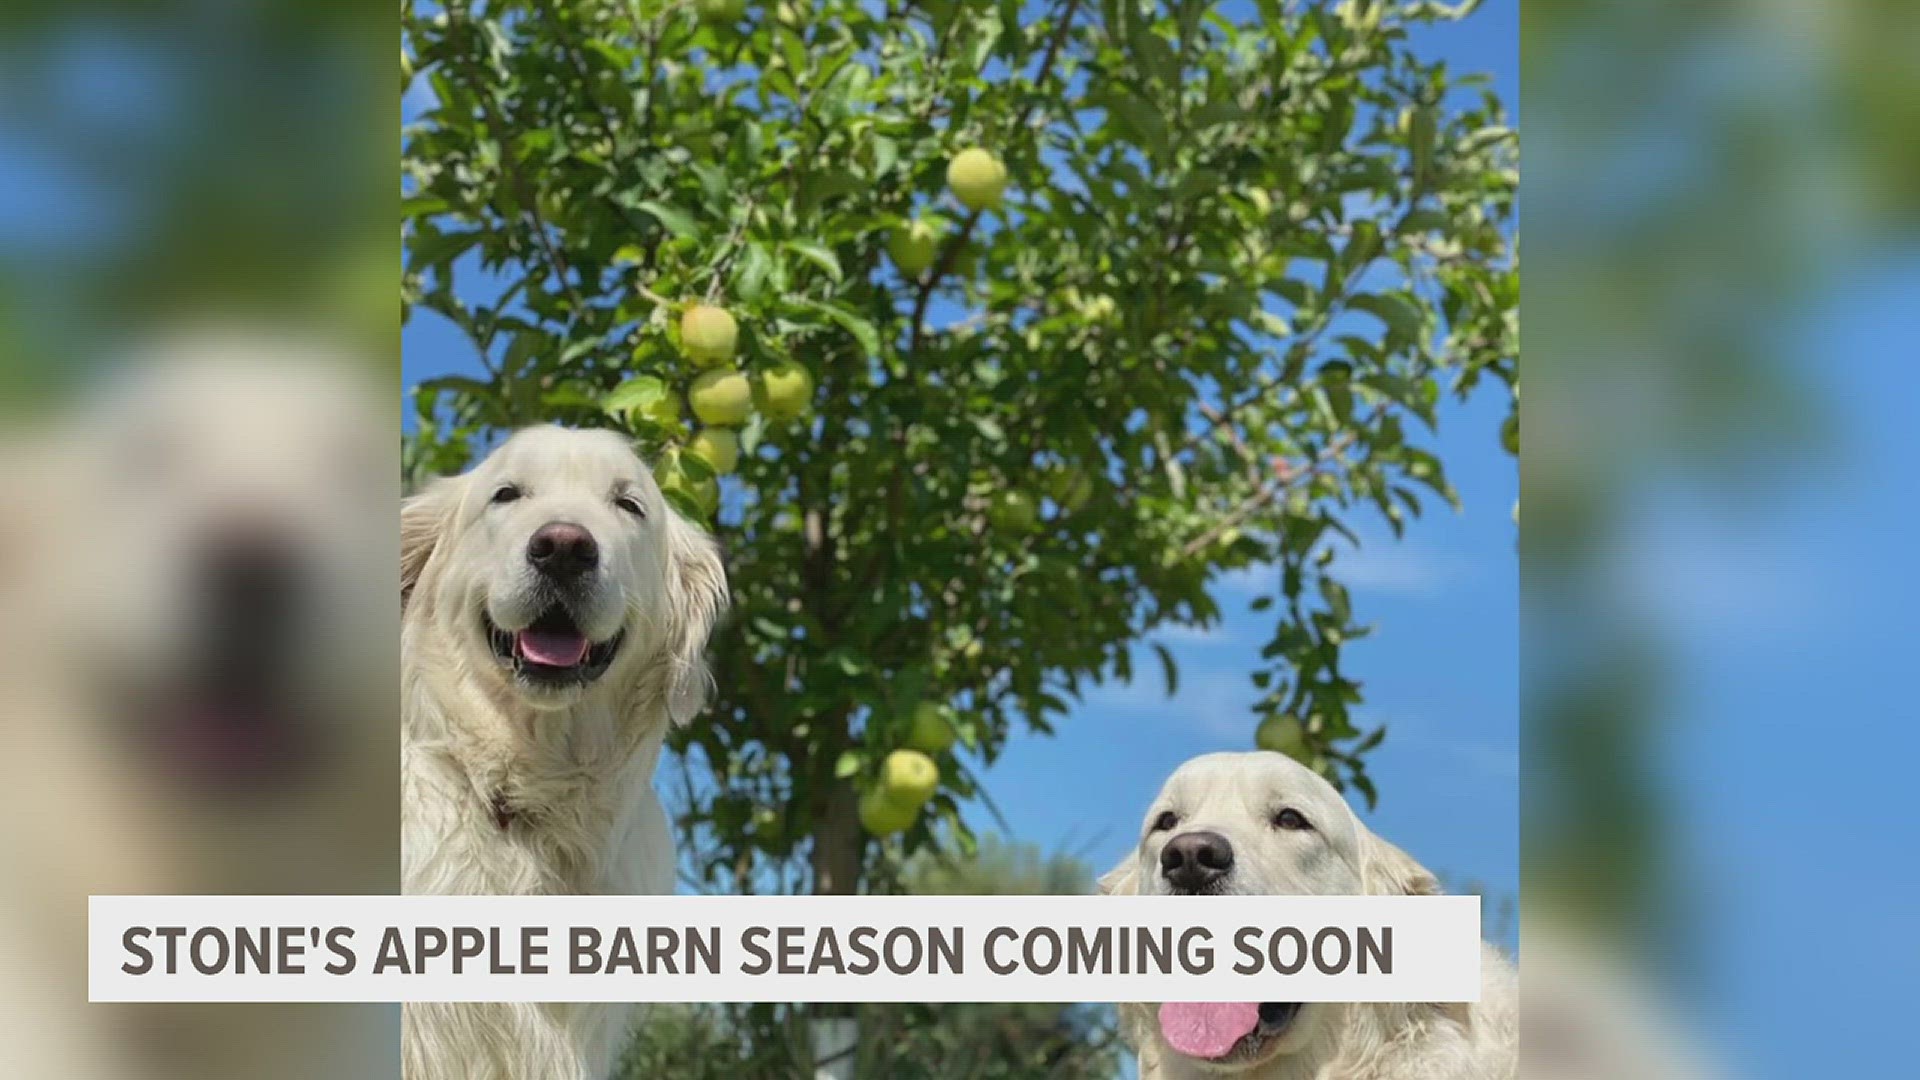 August 28 is the first day Stone's Apple Barn in East Moline will open to the public. They also announced that apple picking will start in September.